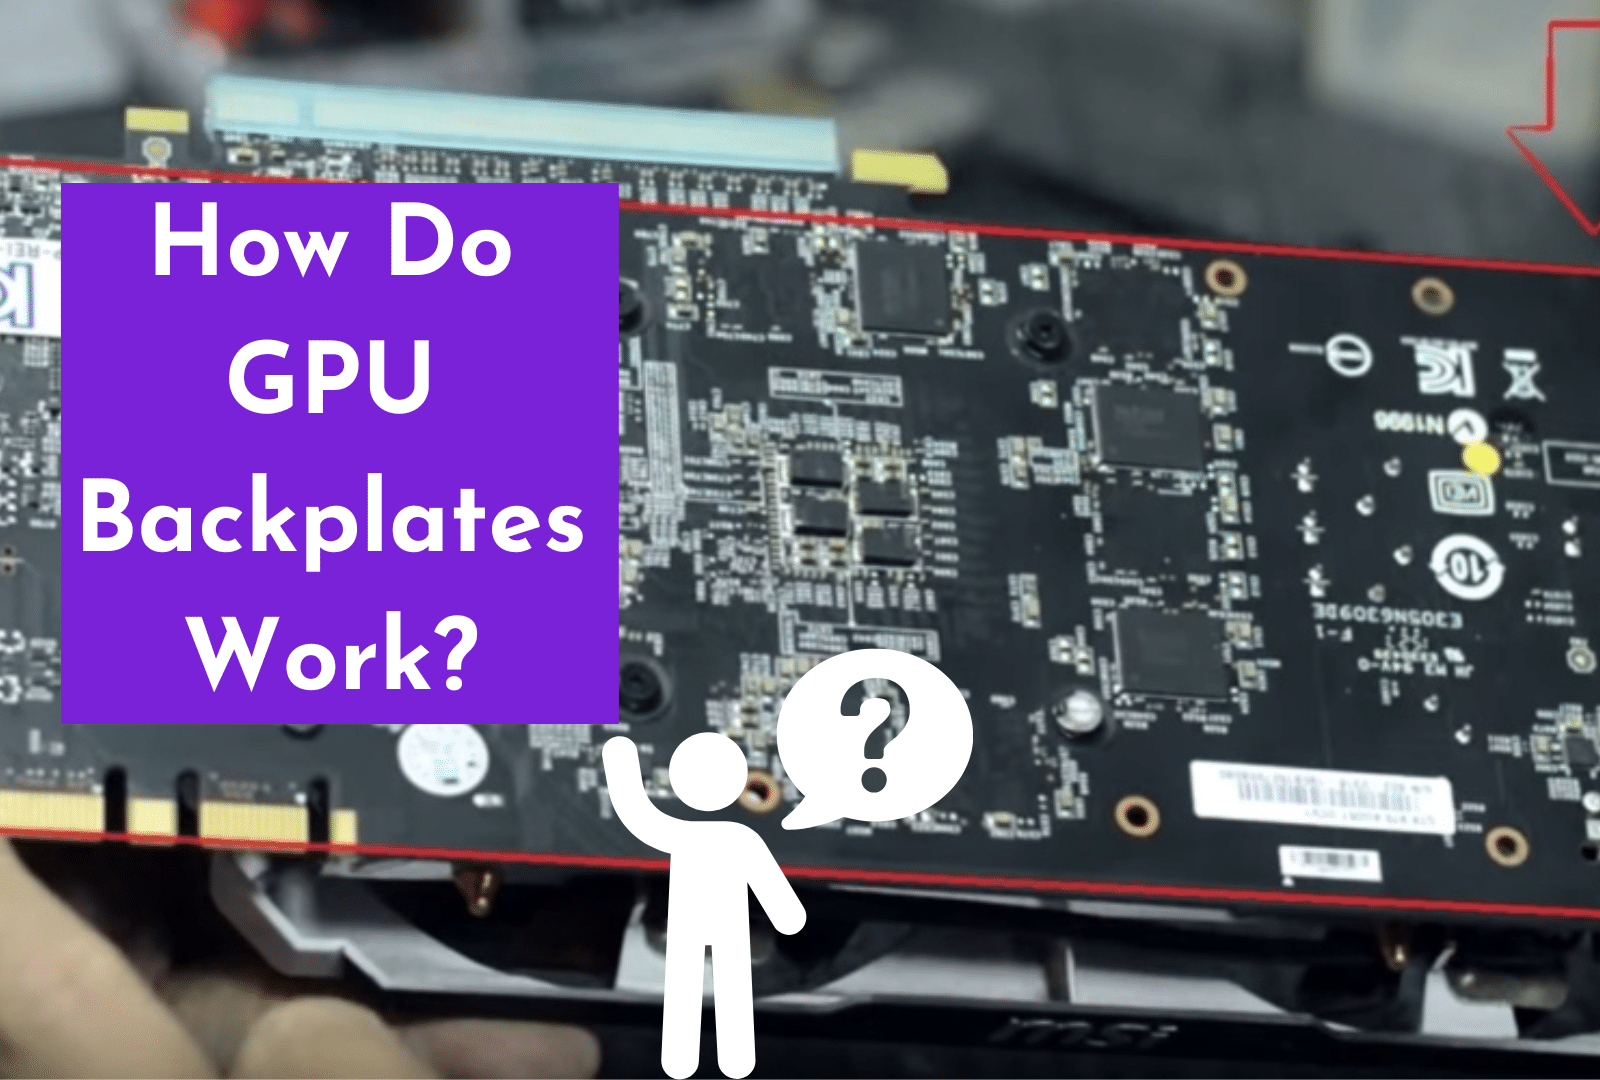 C:\Users\Mohsin\Downloads\How Do GPU Backplates Work.png